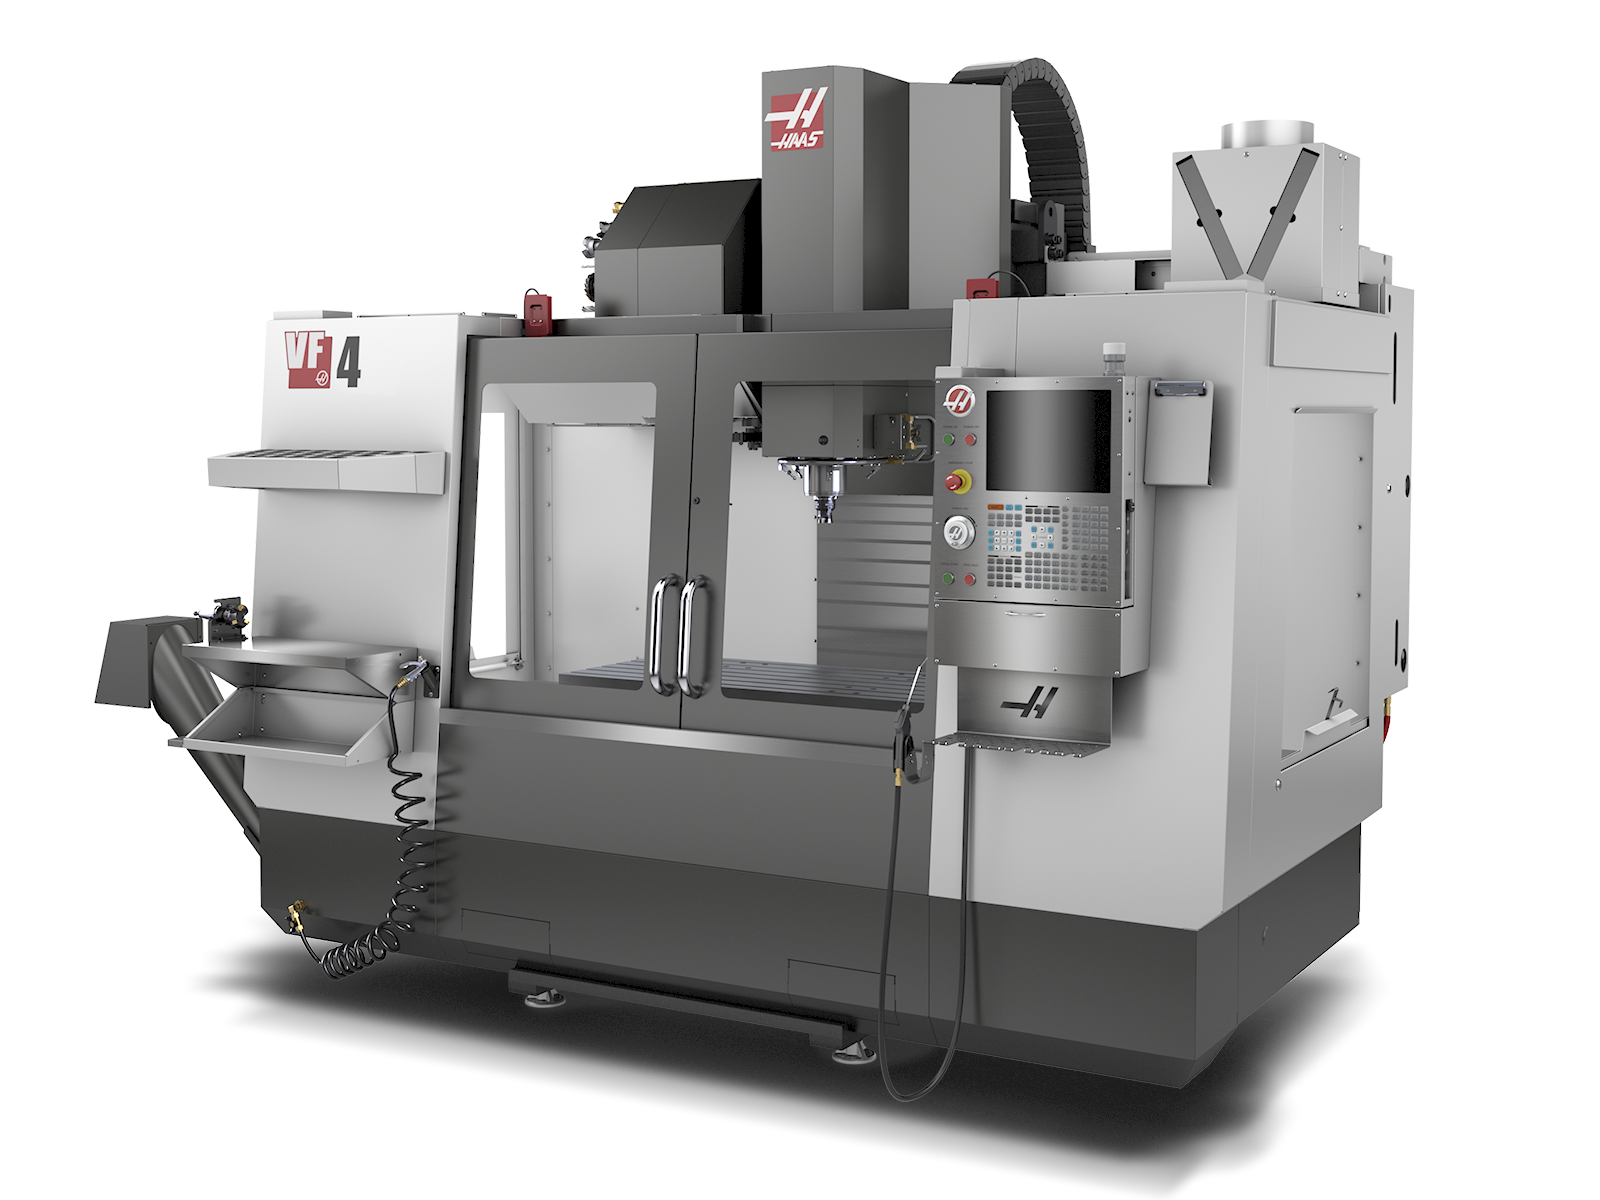 The VF-4: Haas' Flagship Vertical Mill